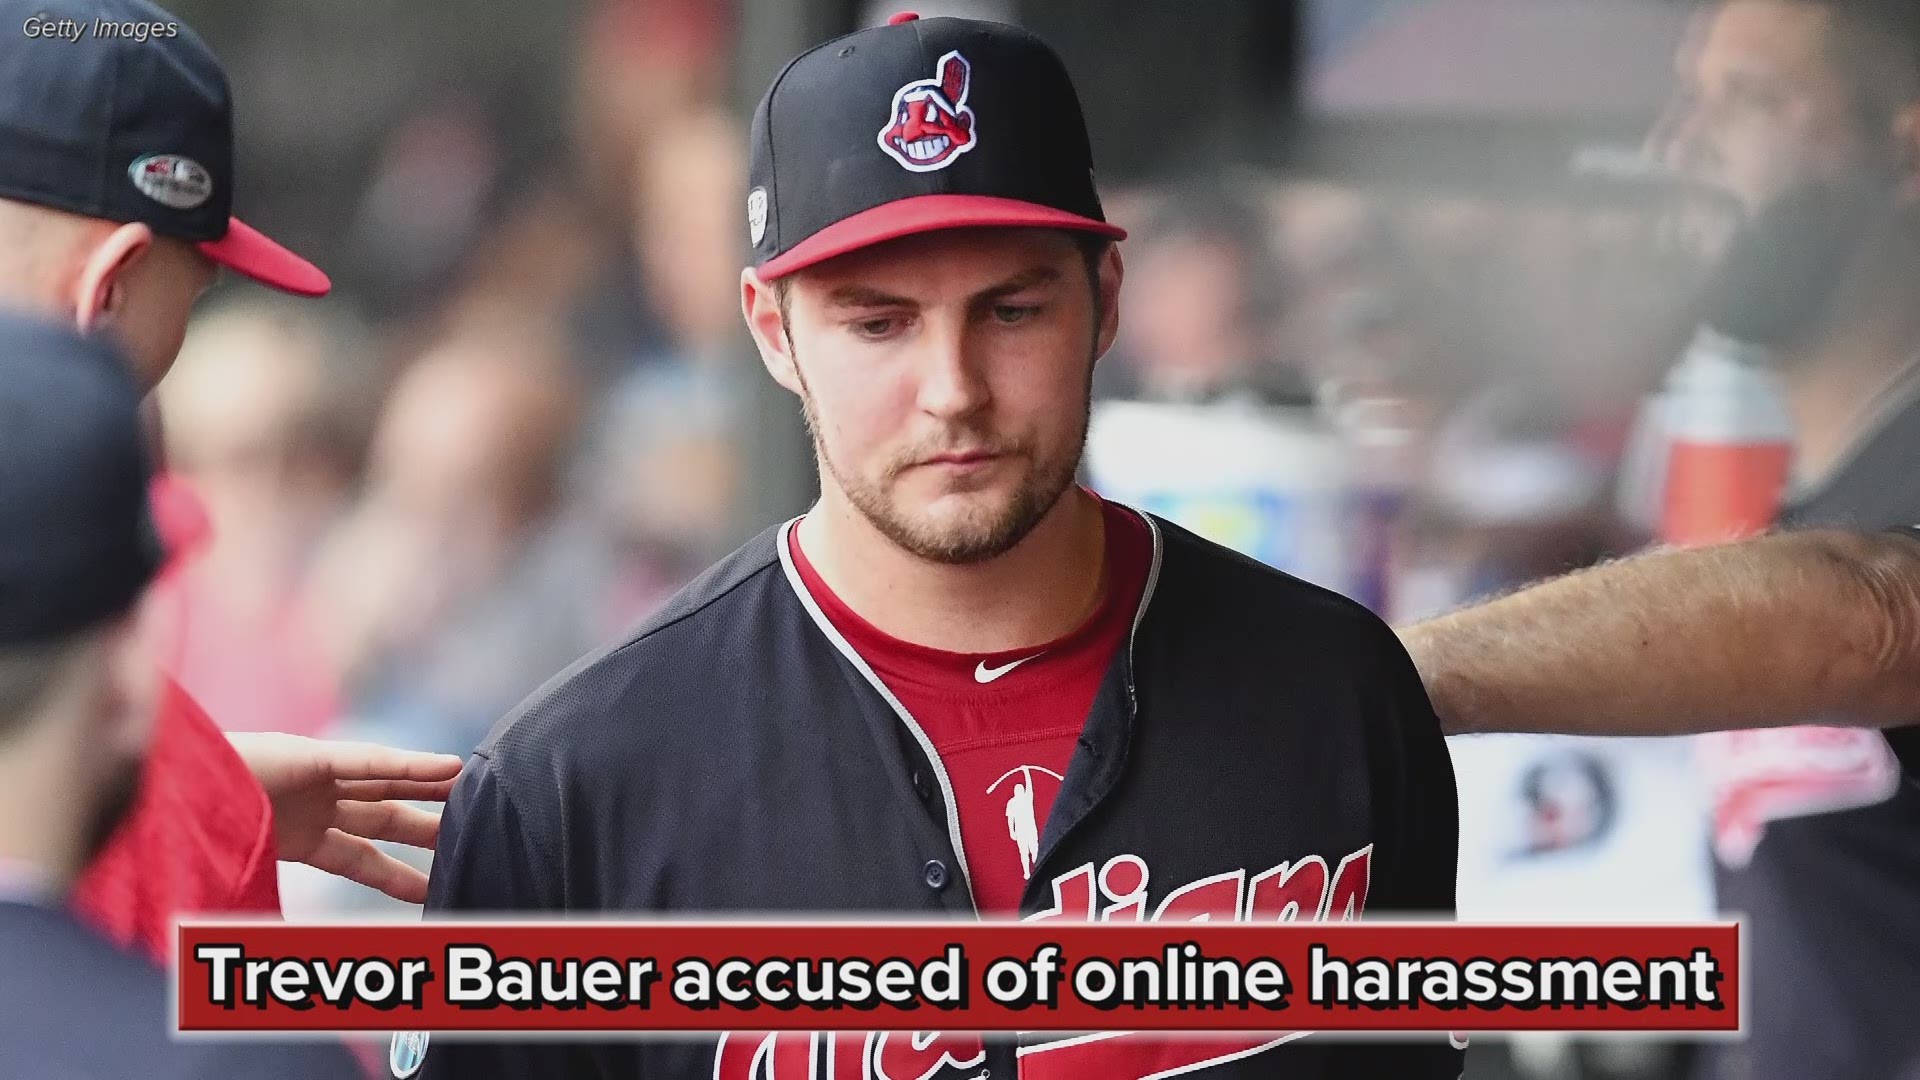 A 21-year-old college student in Texas spent the weekend in a heated Twitter exchange with Cleveland Indians pitcher Trevor Bauer.